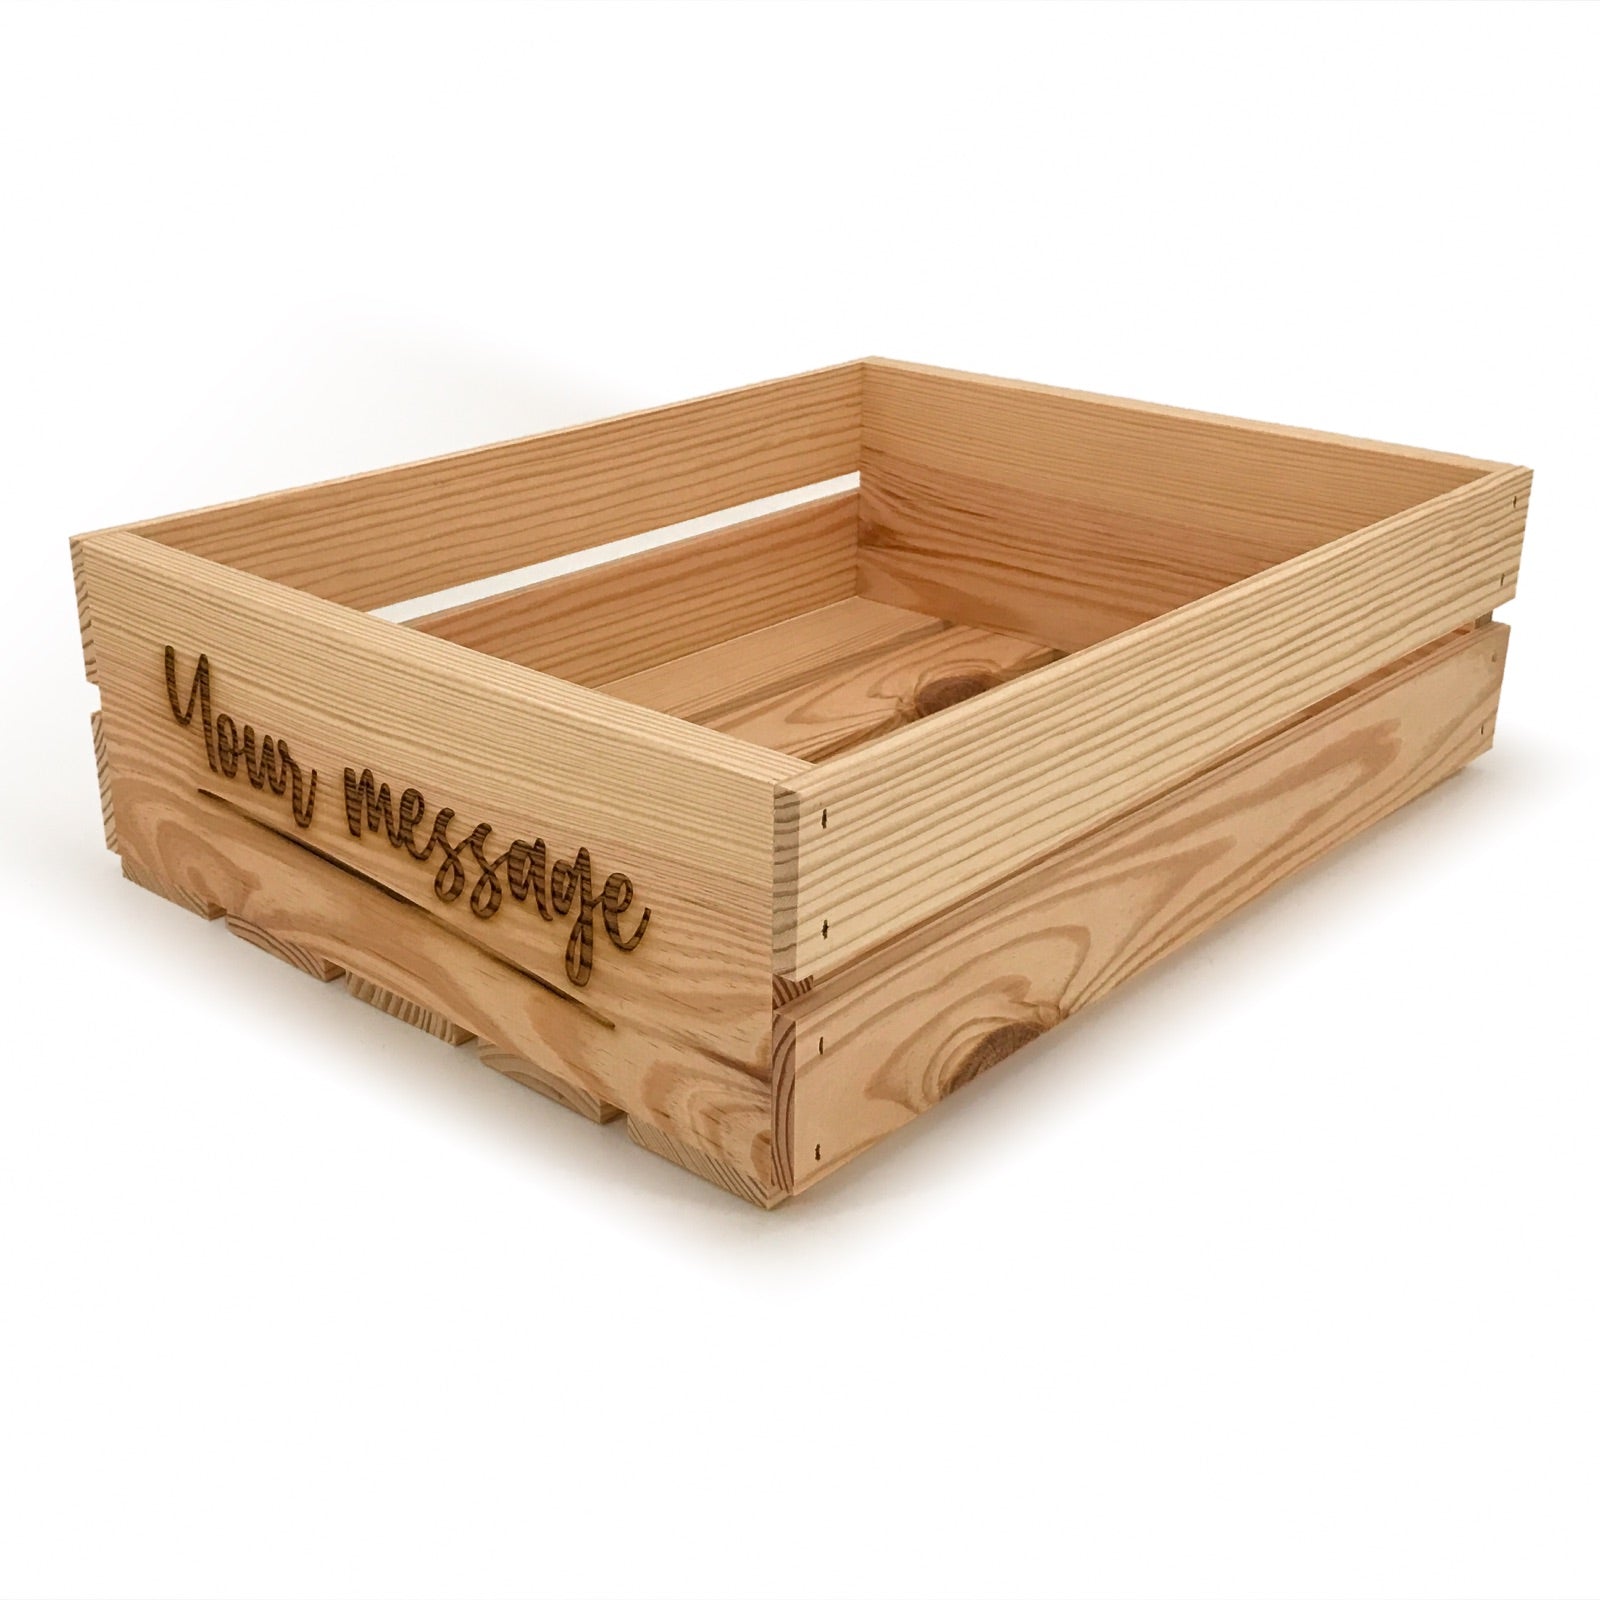 Small wooden crate with custom message 18x14x5.25, 6-WS-18-14-5.25-ST-NW-NL, 12-WS-18-14-5.25-ST-NW-NL, 24-WS-18-14-5.25-ST-NW-NL, 48-WS-18-14-5.25-ST-NW-NL, 96-WS-18-14-5.25-ST-NW-NL